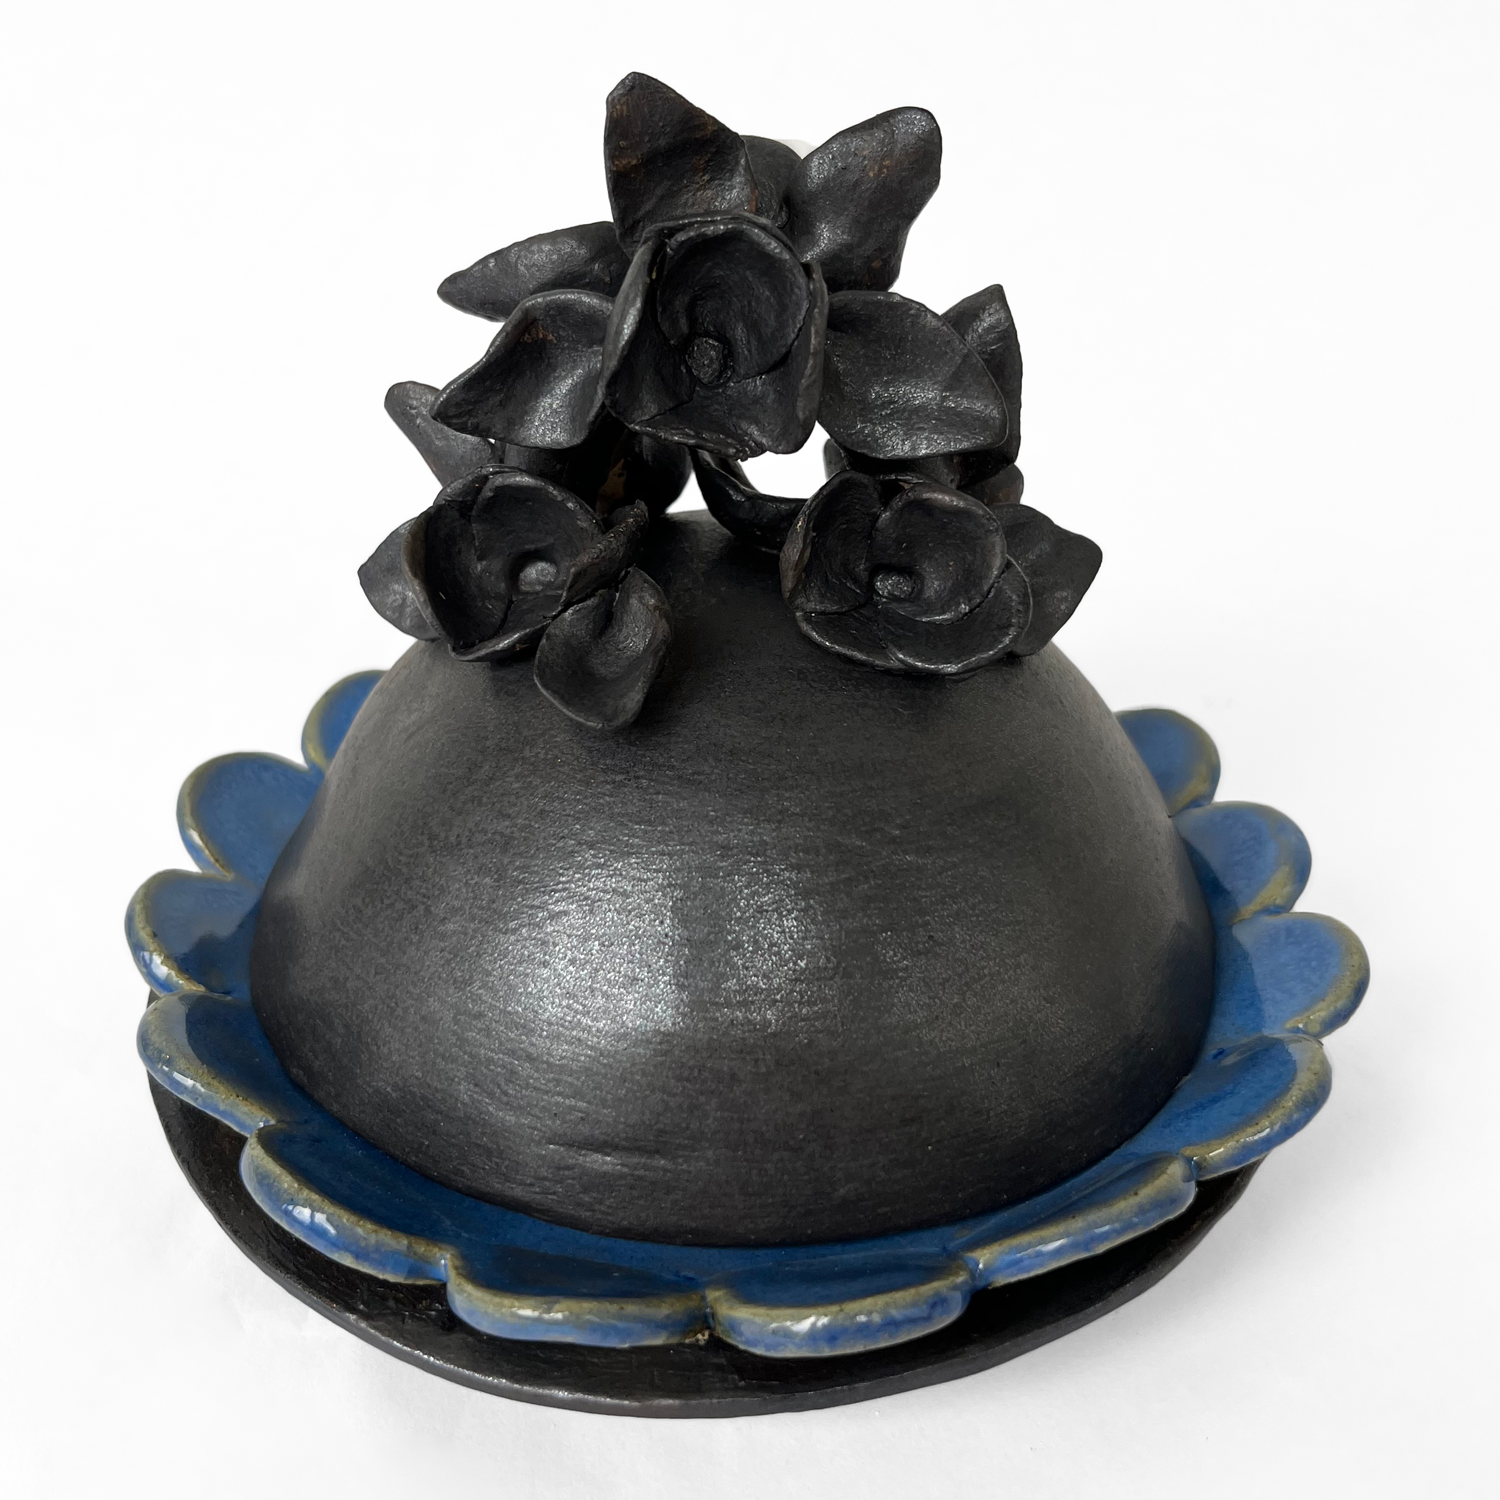 Mariana Bolanos Inclan: Flower Butter Dish Product Image 1 of 2